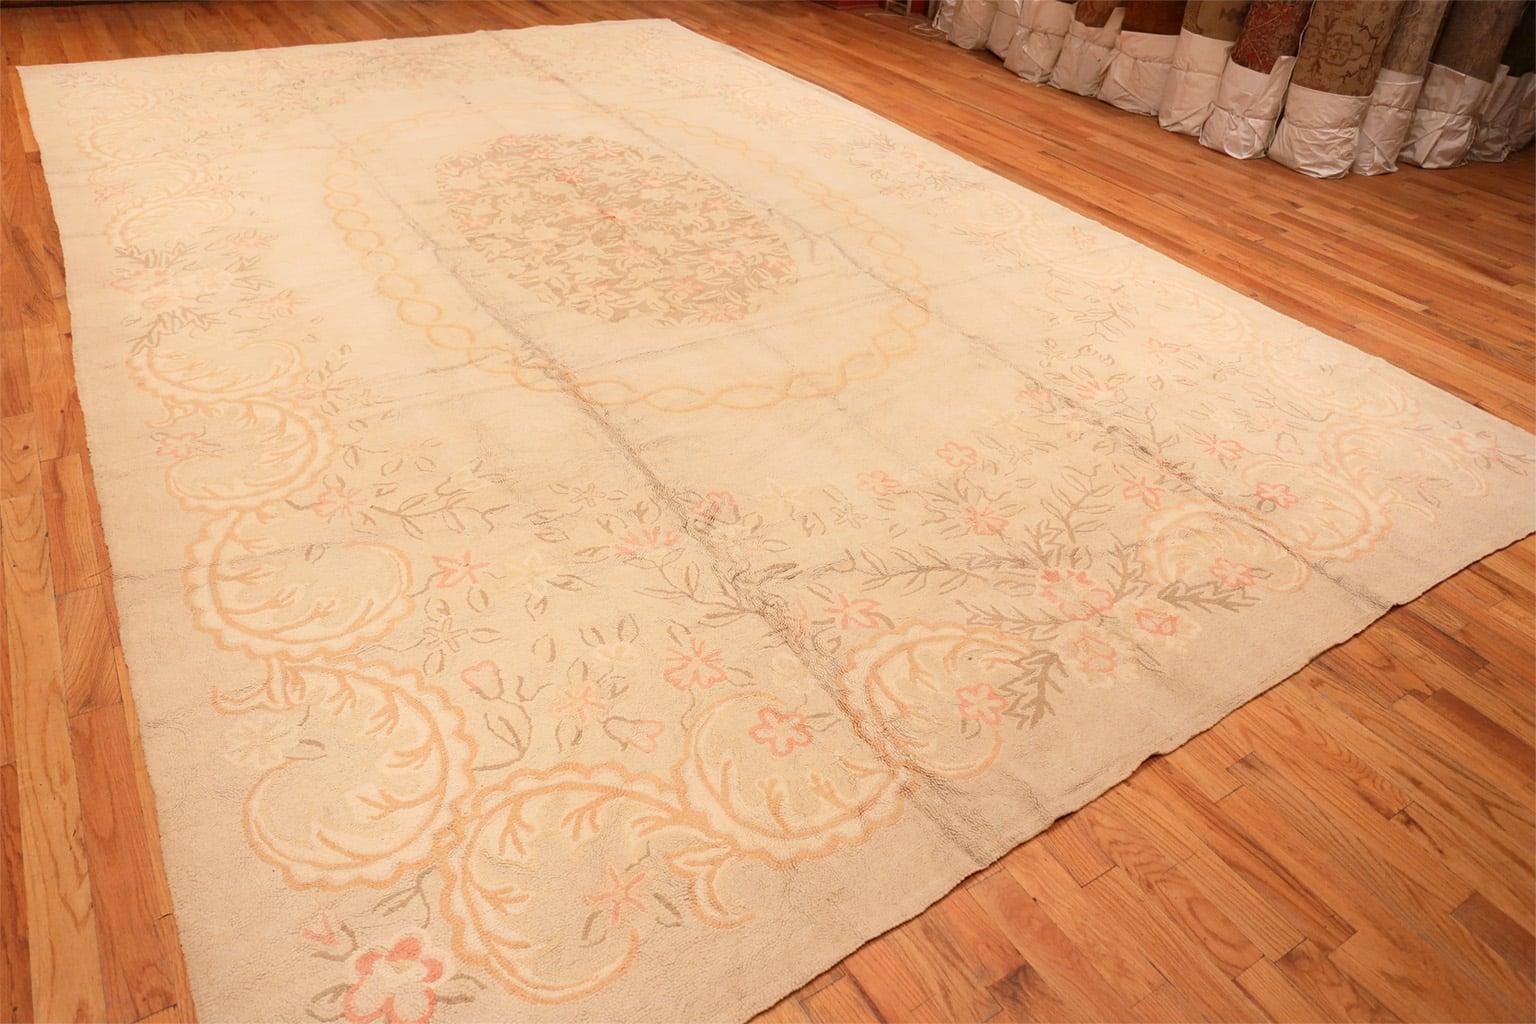 Antique American Hooked Rug. 11 ft 4 in x 18 ft 2 in In Good Condition For Sale In New York, NY